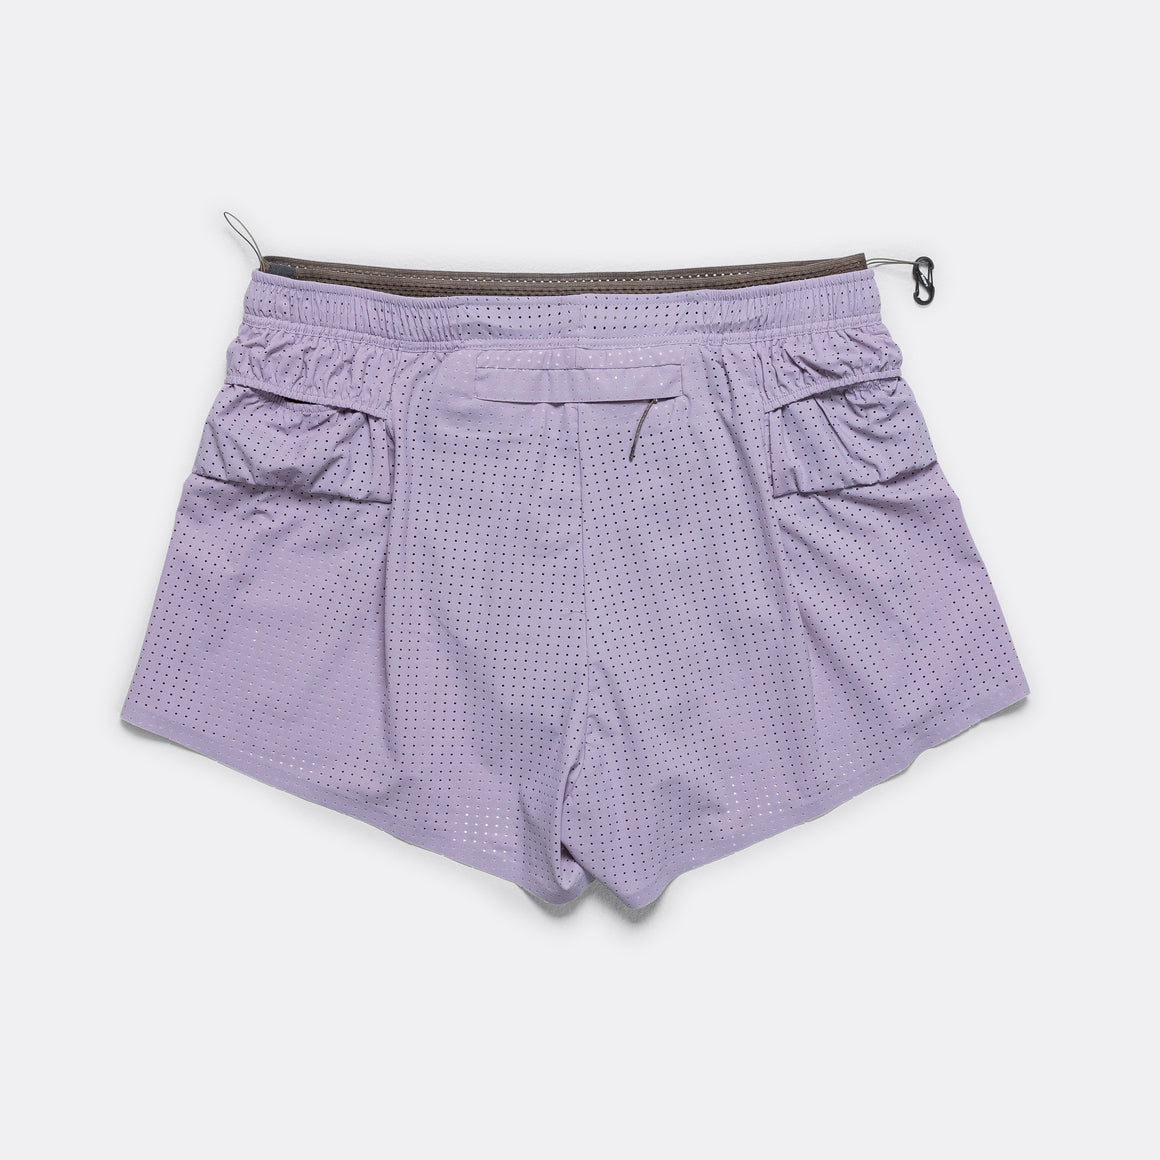 Satisfy - Space-O™ 2.5" Distance Shorts - Lavender Grey - Up There Athletics